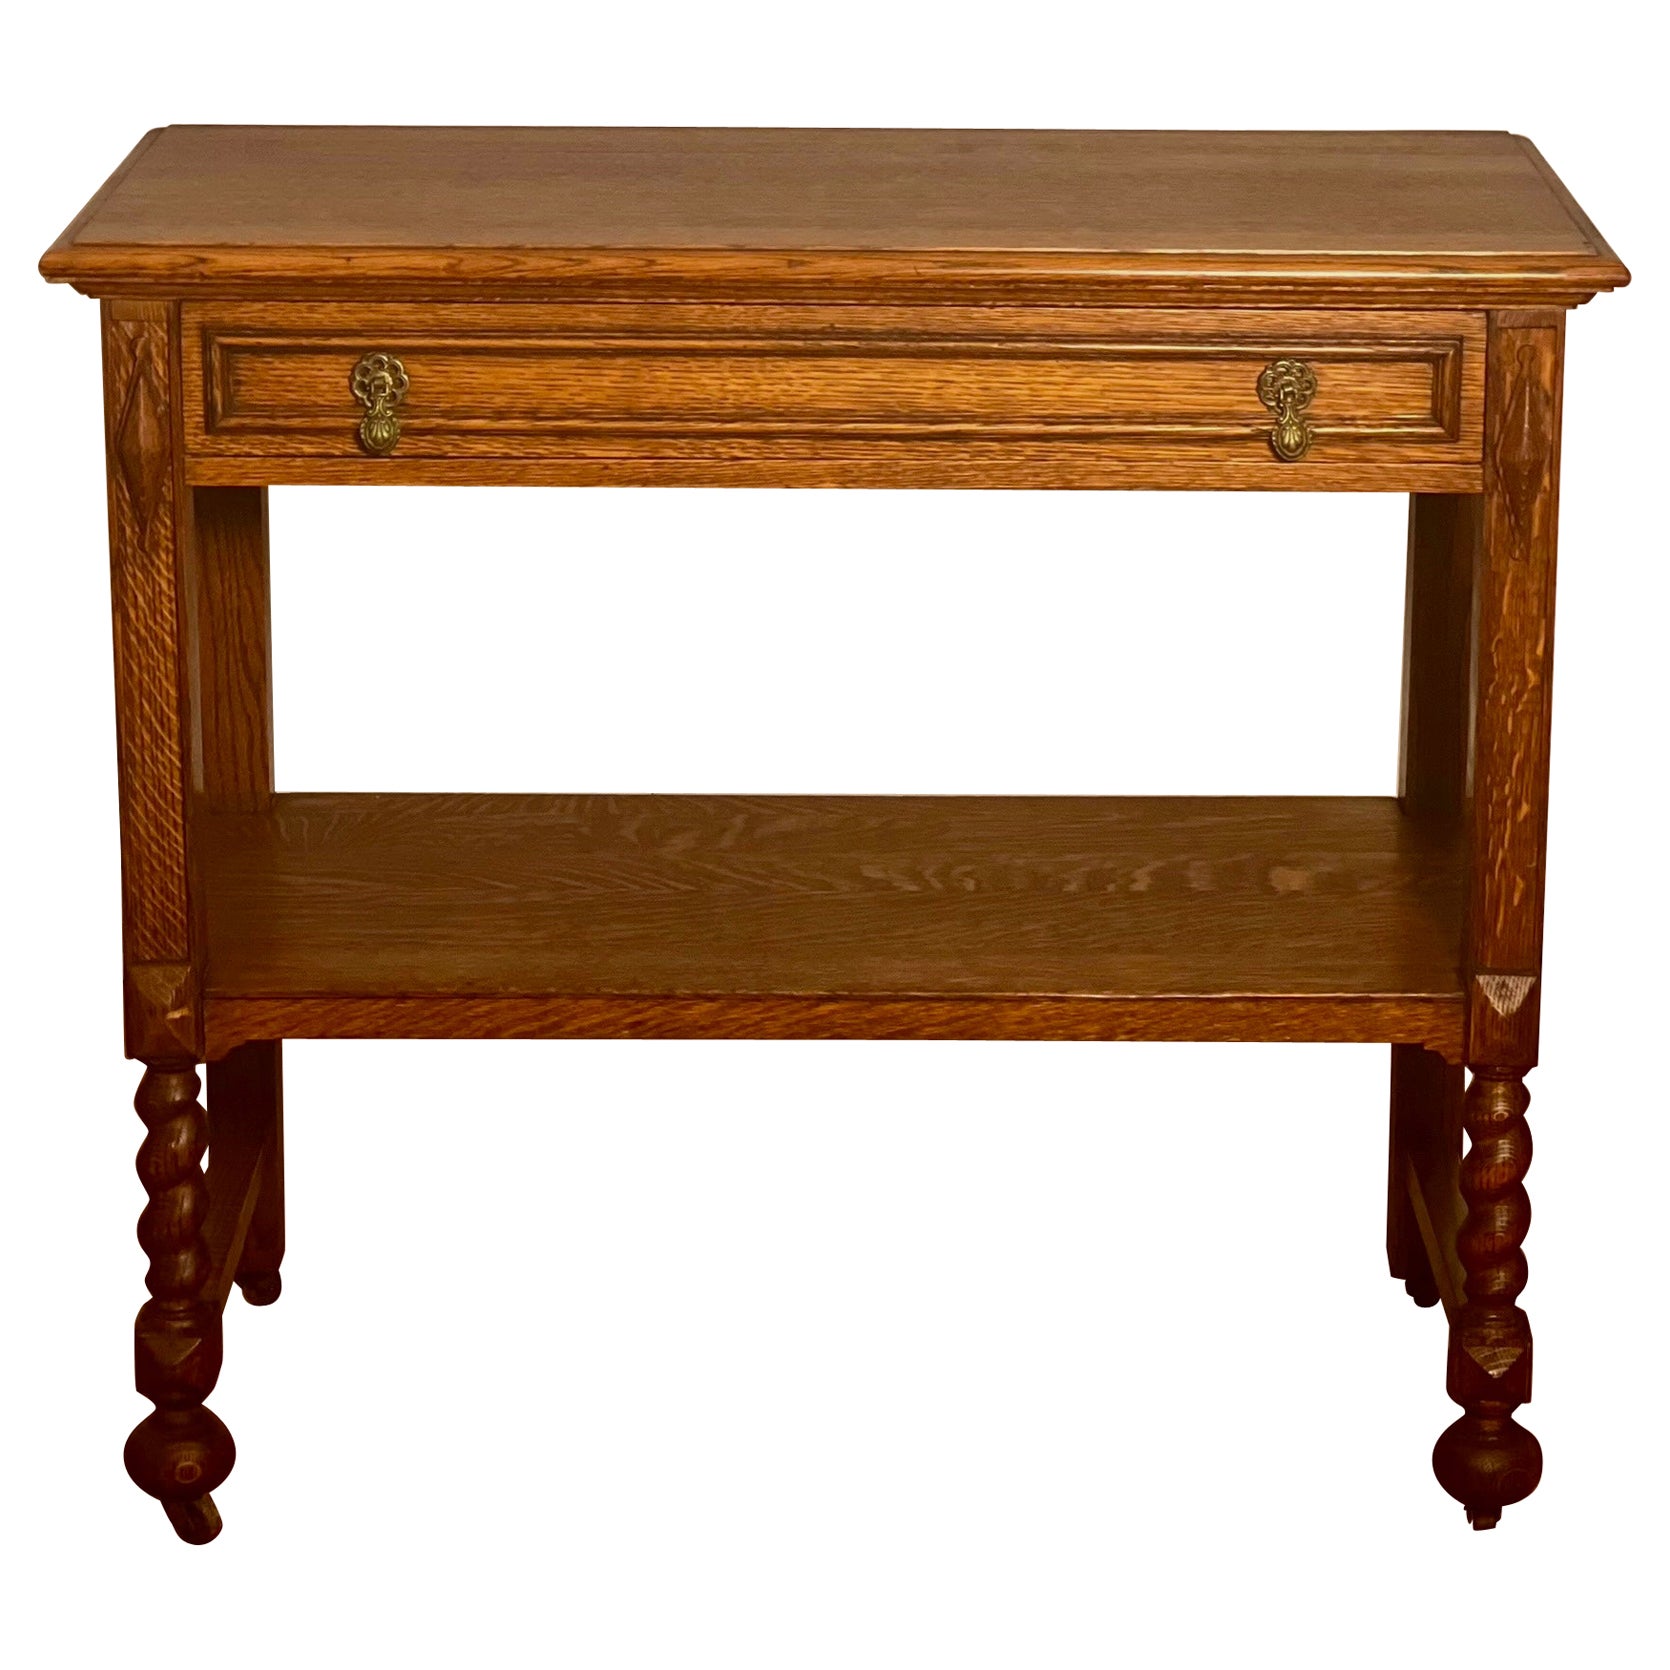 Early 20th Century English Quarter Sawn Oak Two-Tier Server on Casters For Sale